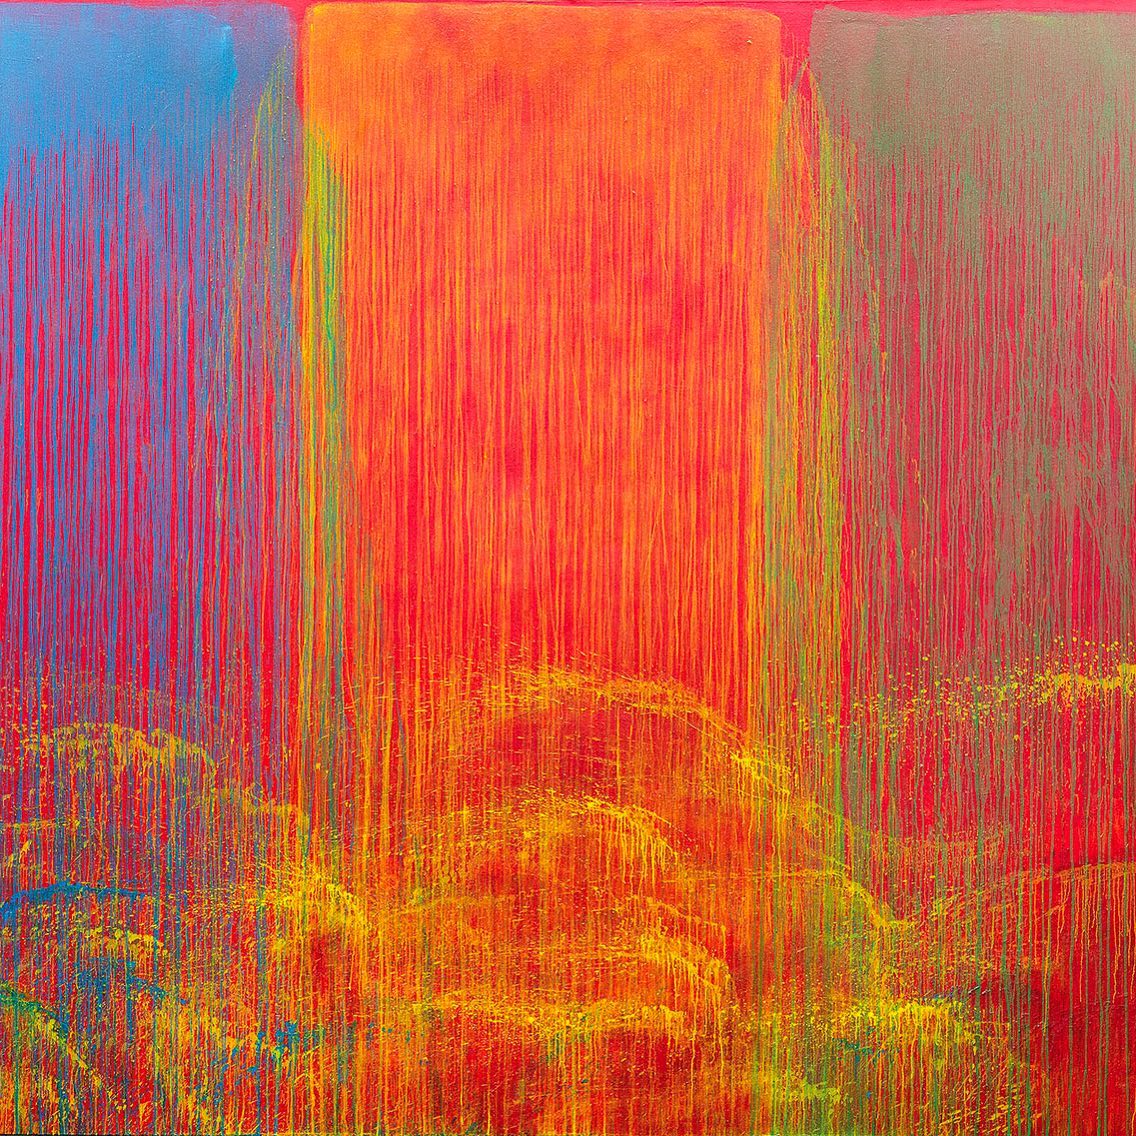 #patsteir is best known for her abstract dripped waterfall paintings.